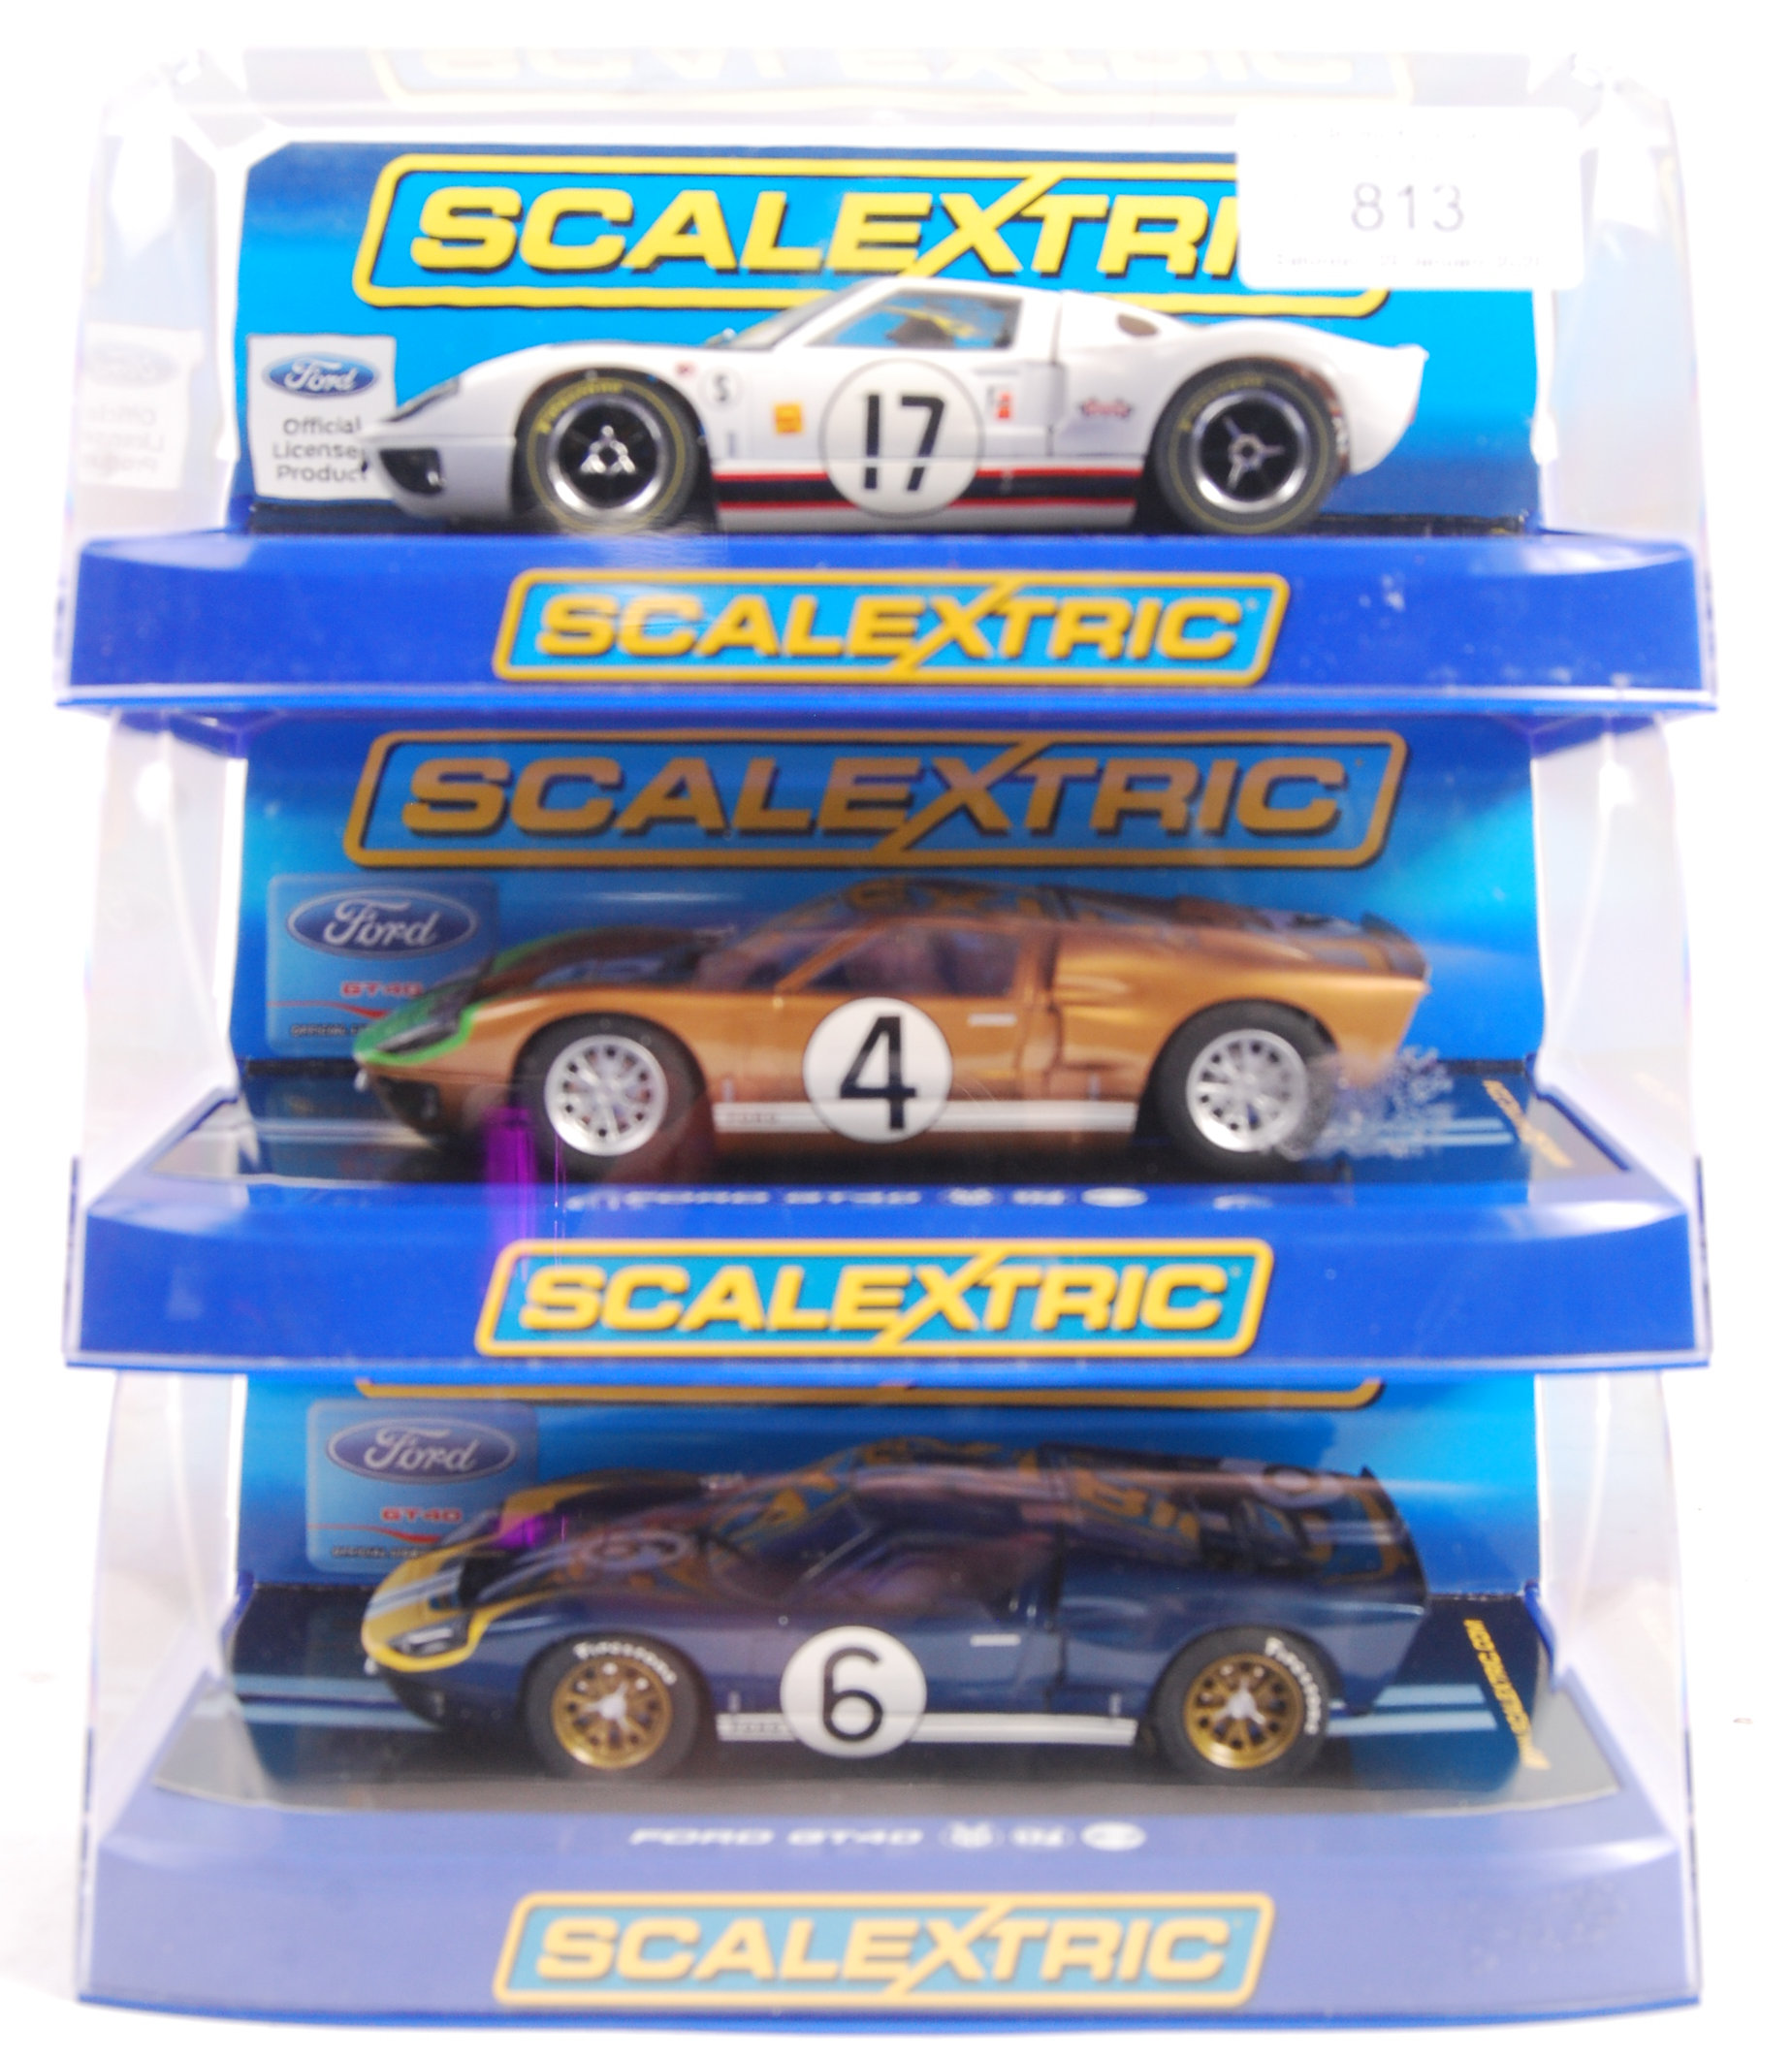 SCALEXTRIC 1/32 SCALE BOXED SLOT RACING CARS